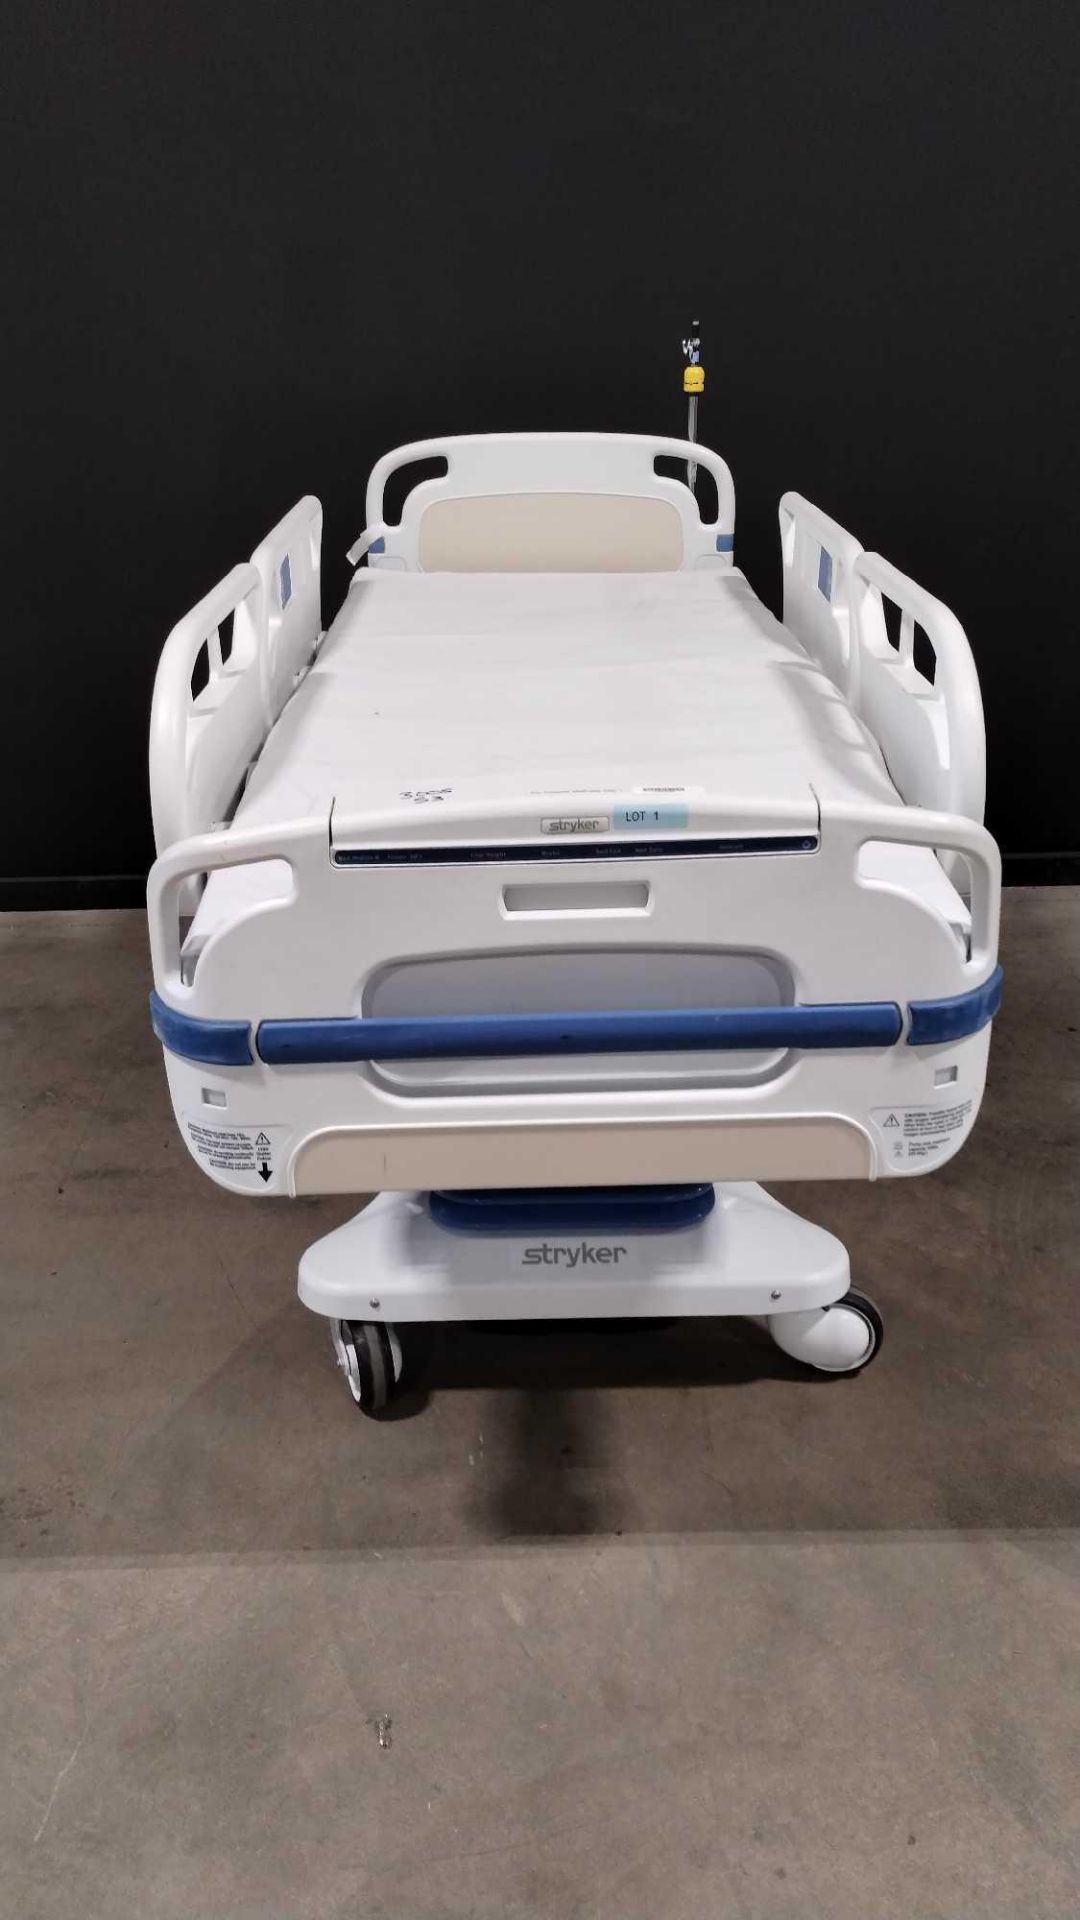 STRYKER 3005 S3 HOSPITAL BED - Image 2 of 4